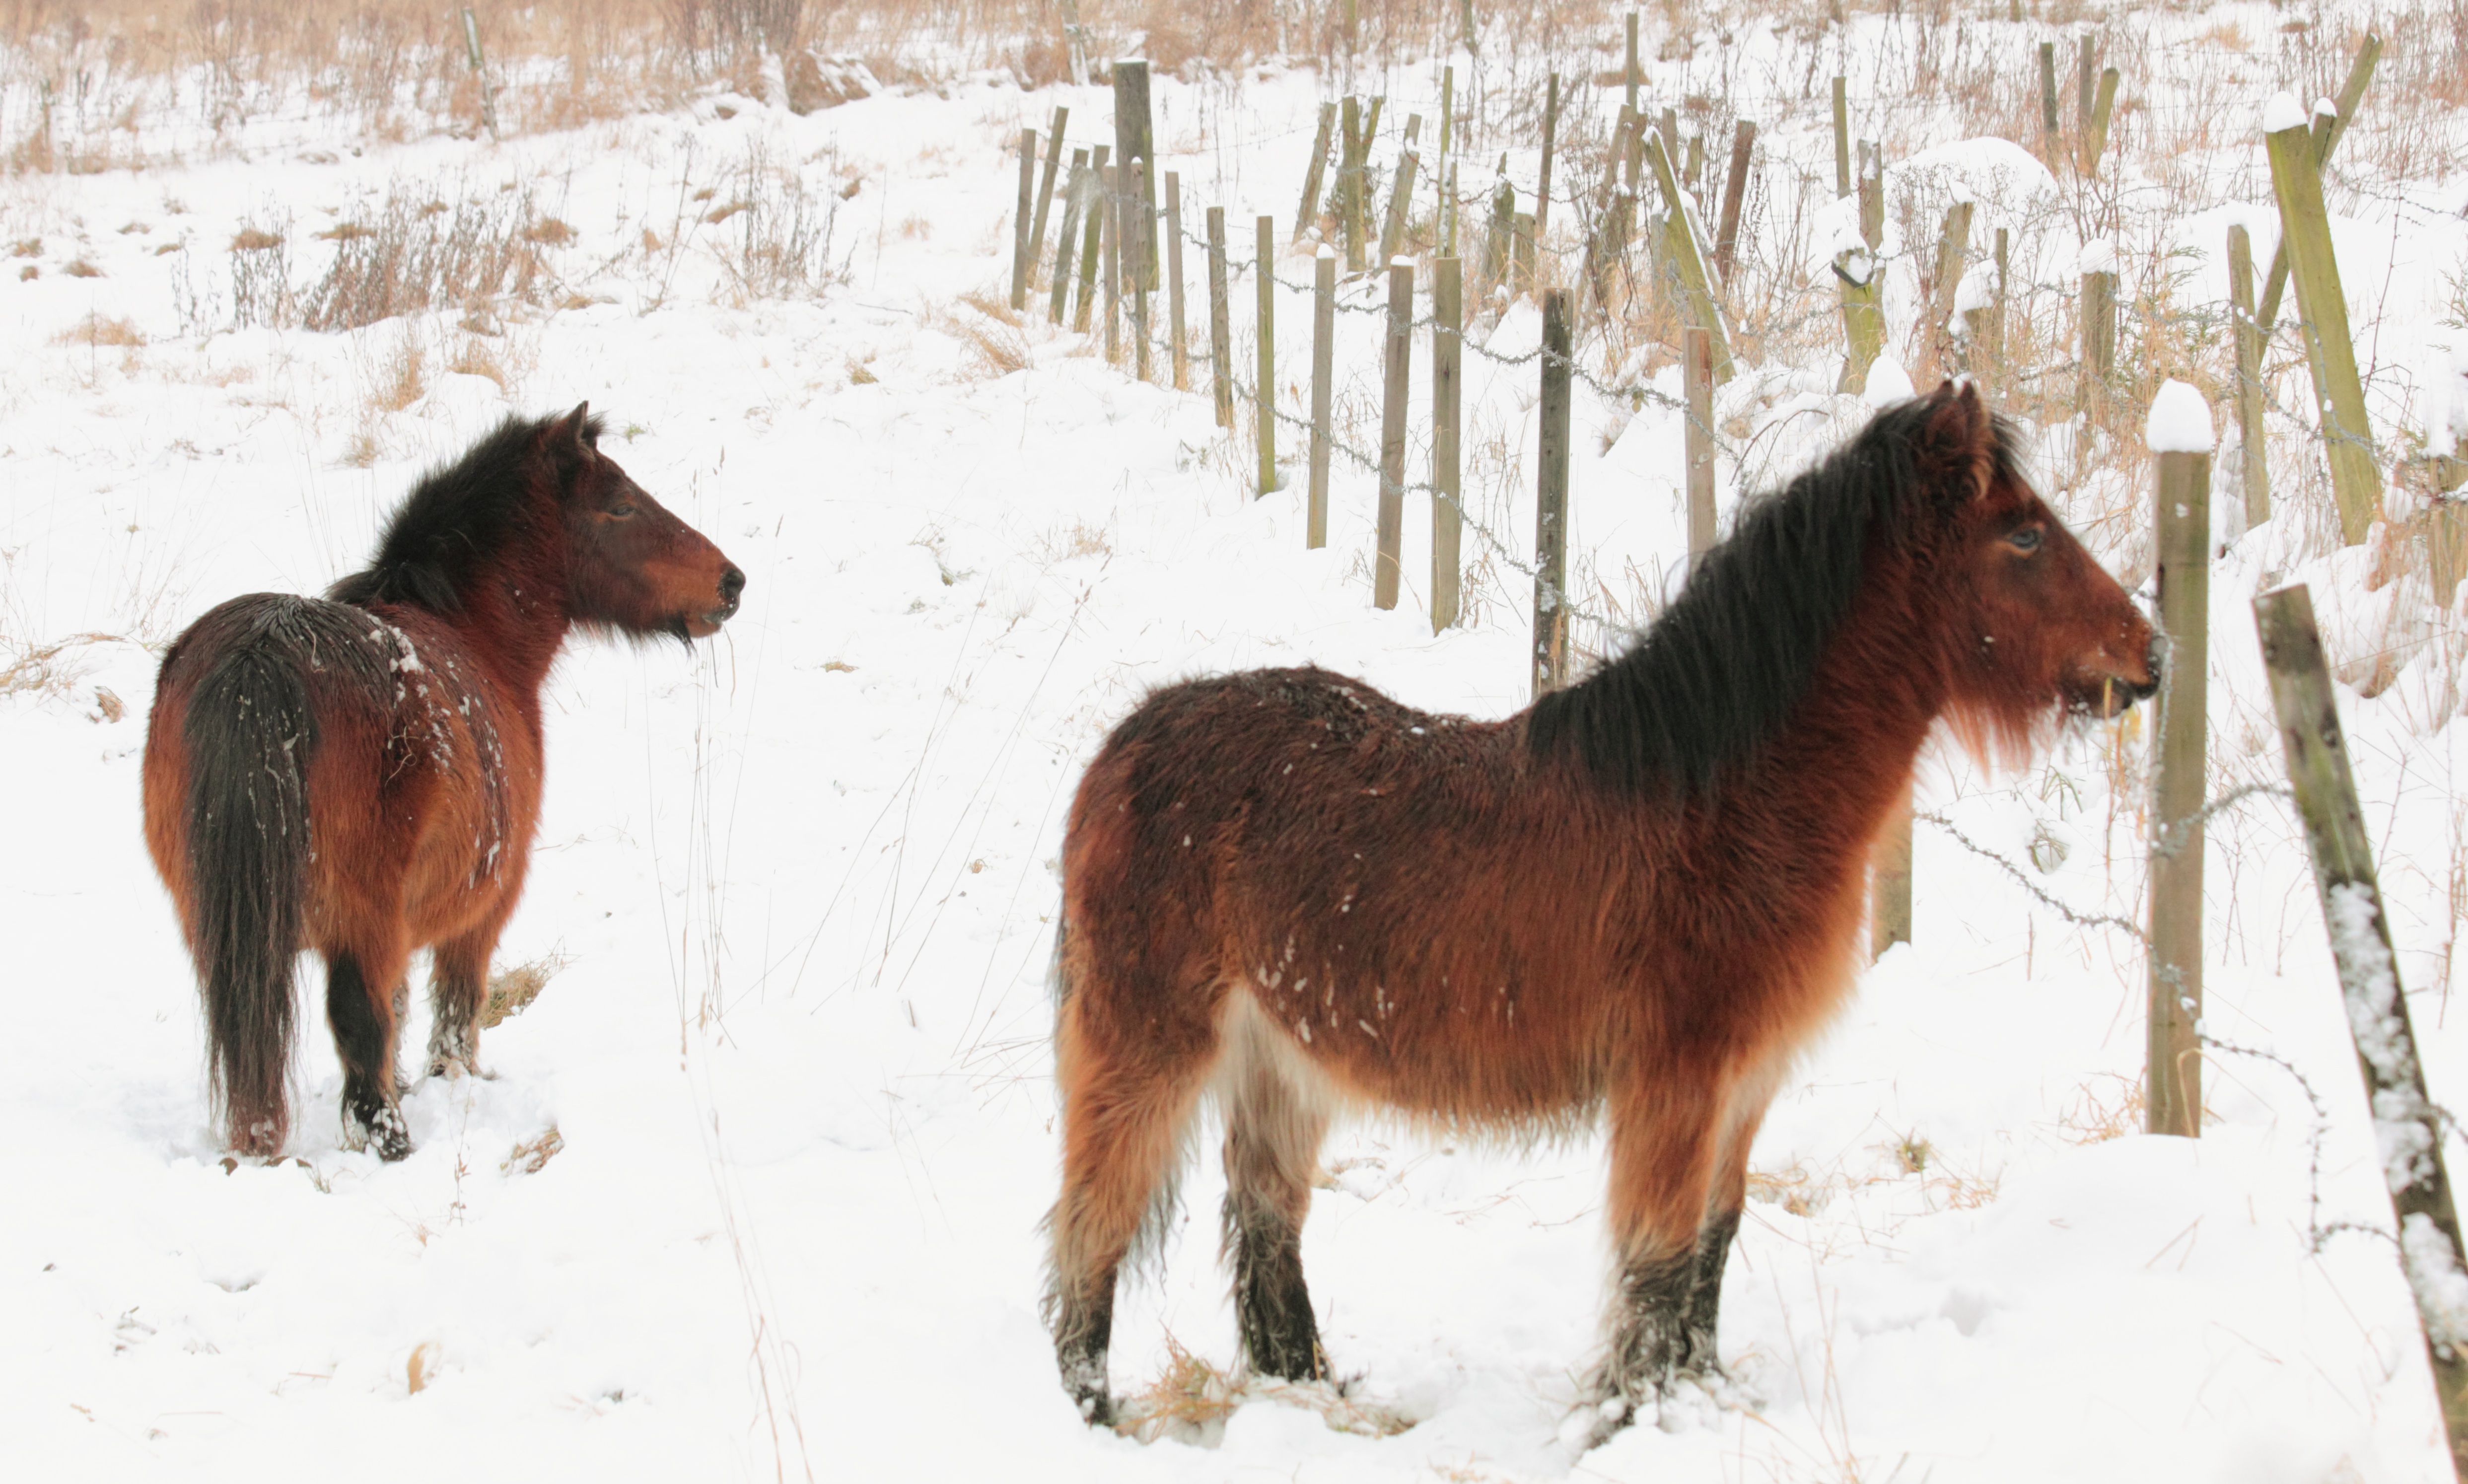 Ponies in the snow photo